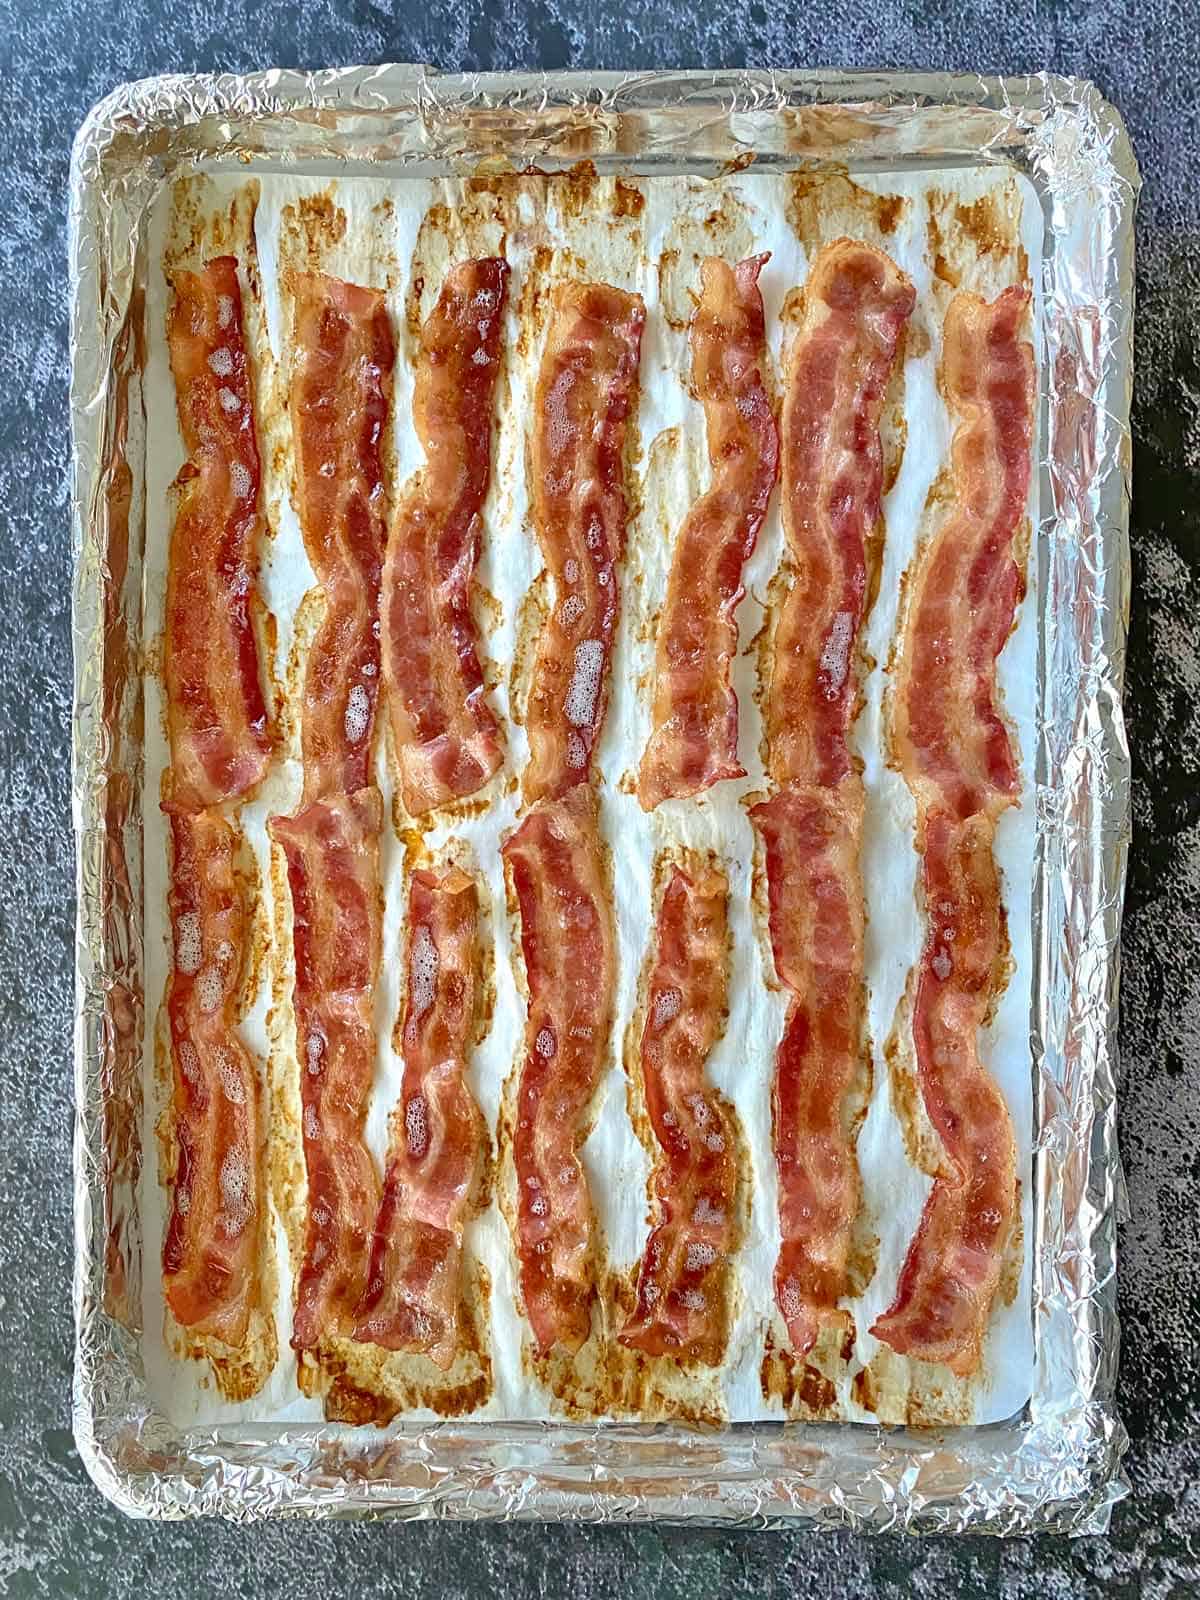 A baking sheet filled with partially cooked bacon strips.